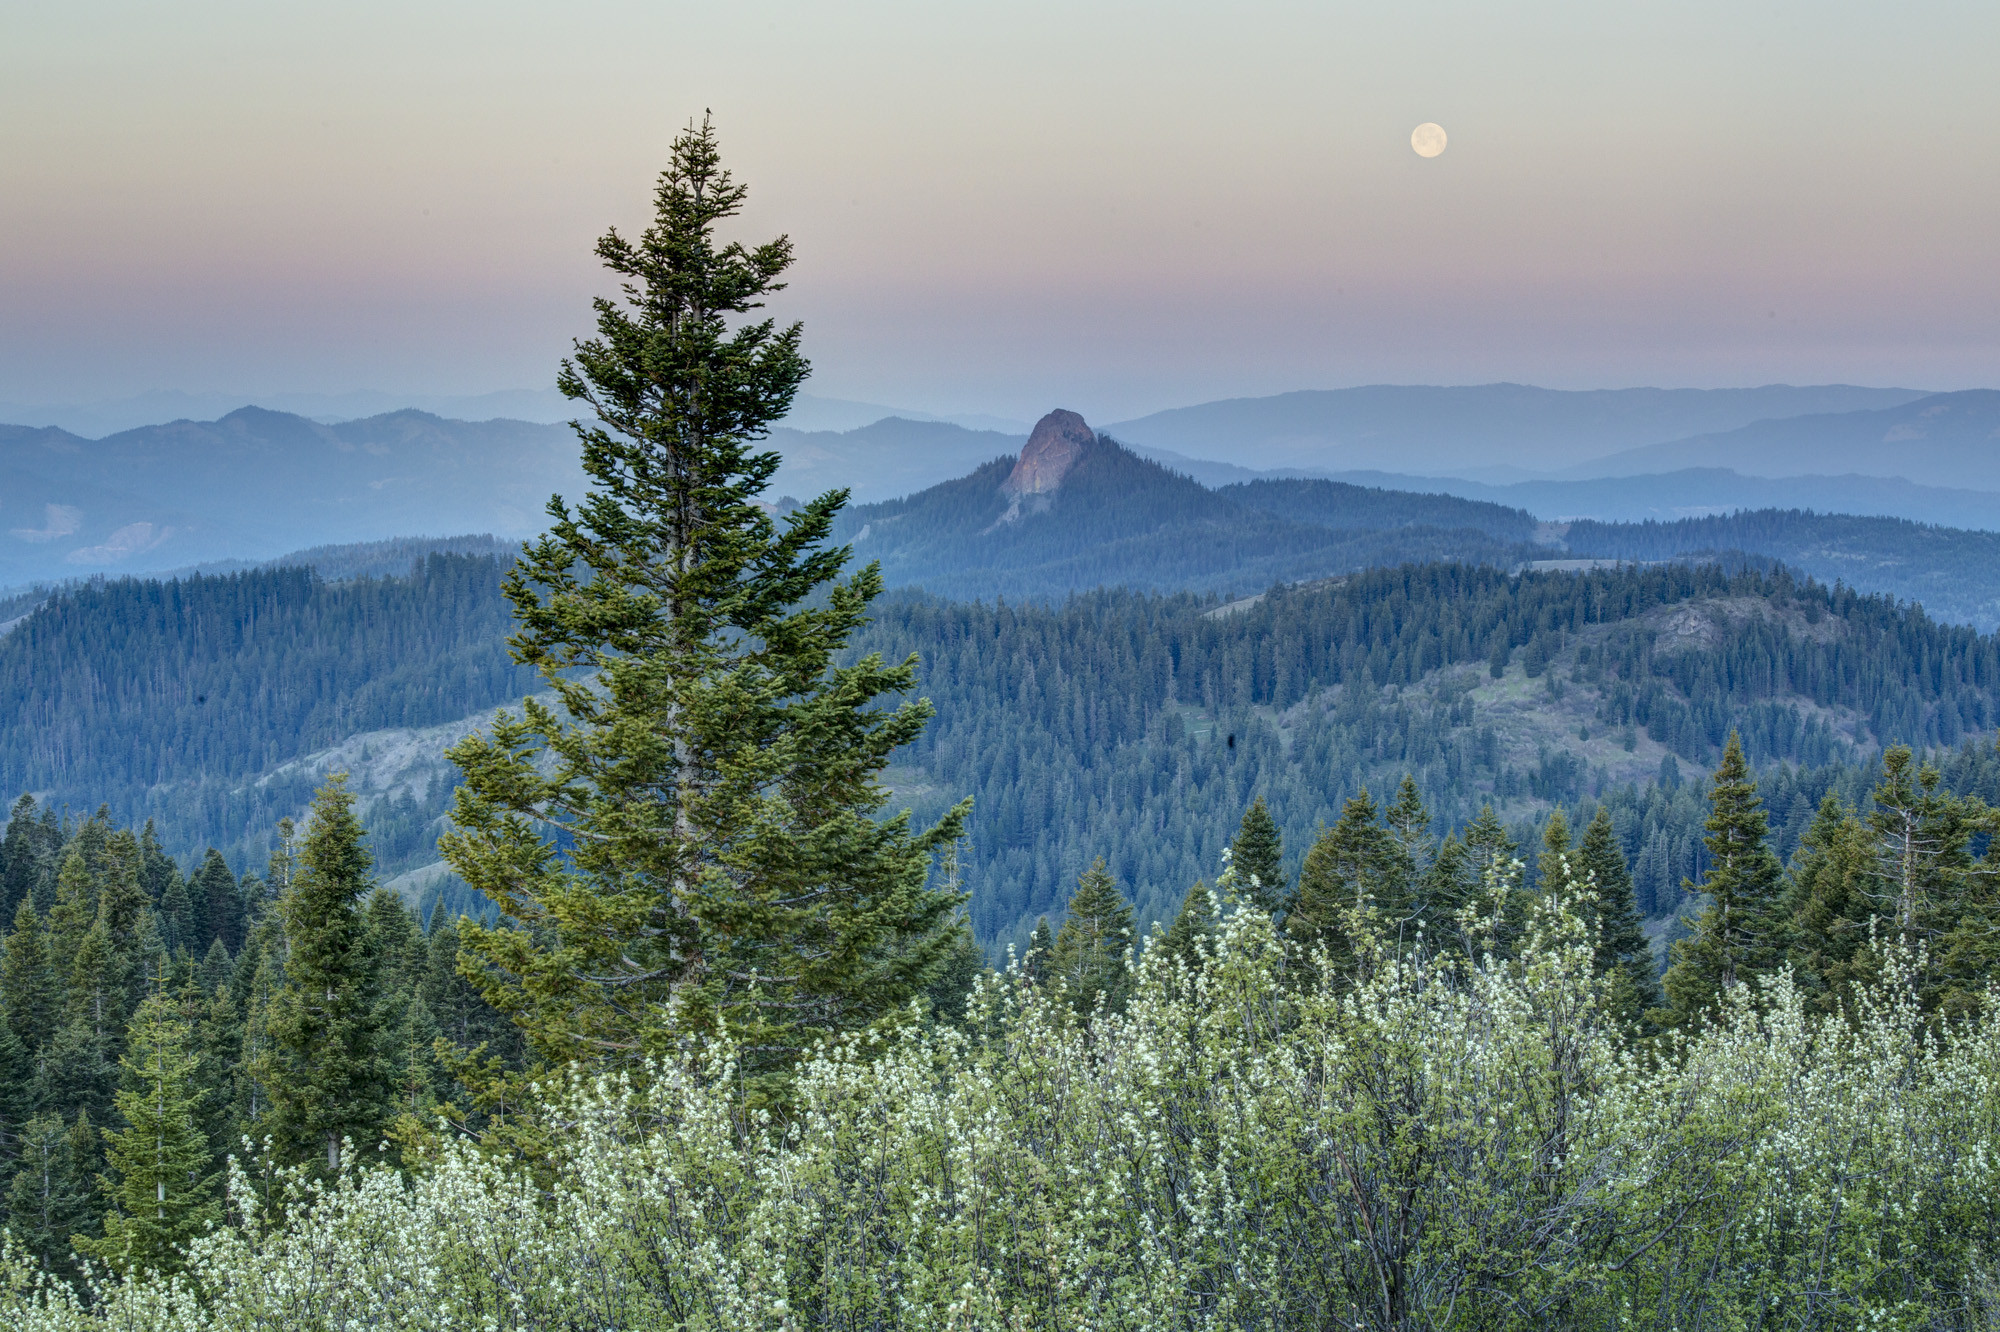 Several tree-covered mountain sets stretch off into the distance with a moon hanging overhead in the pink and orange sky